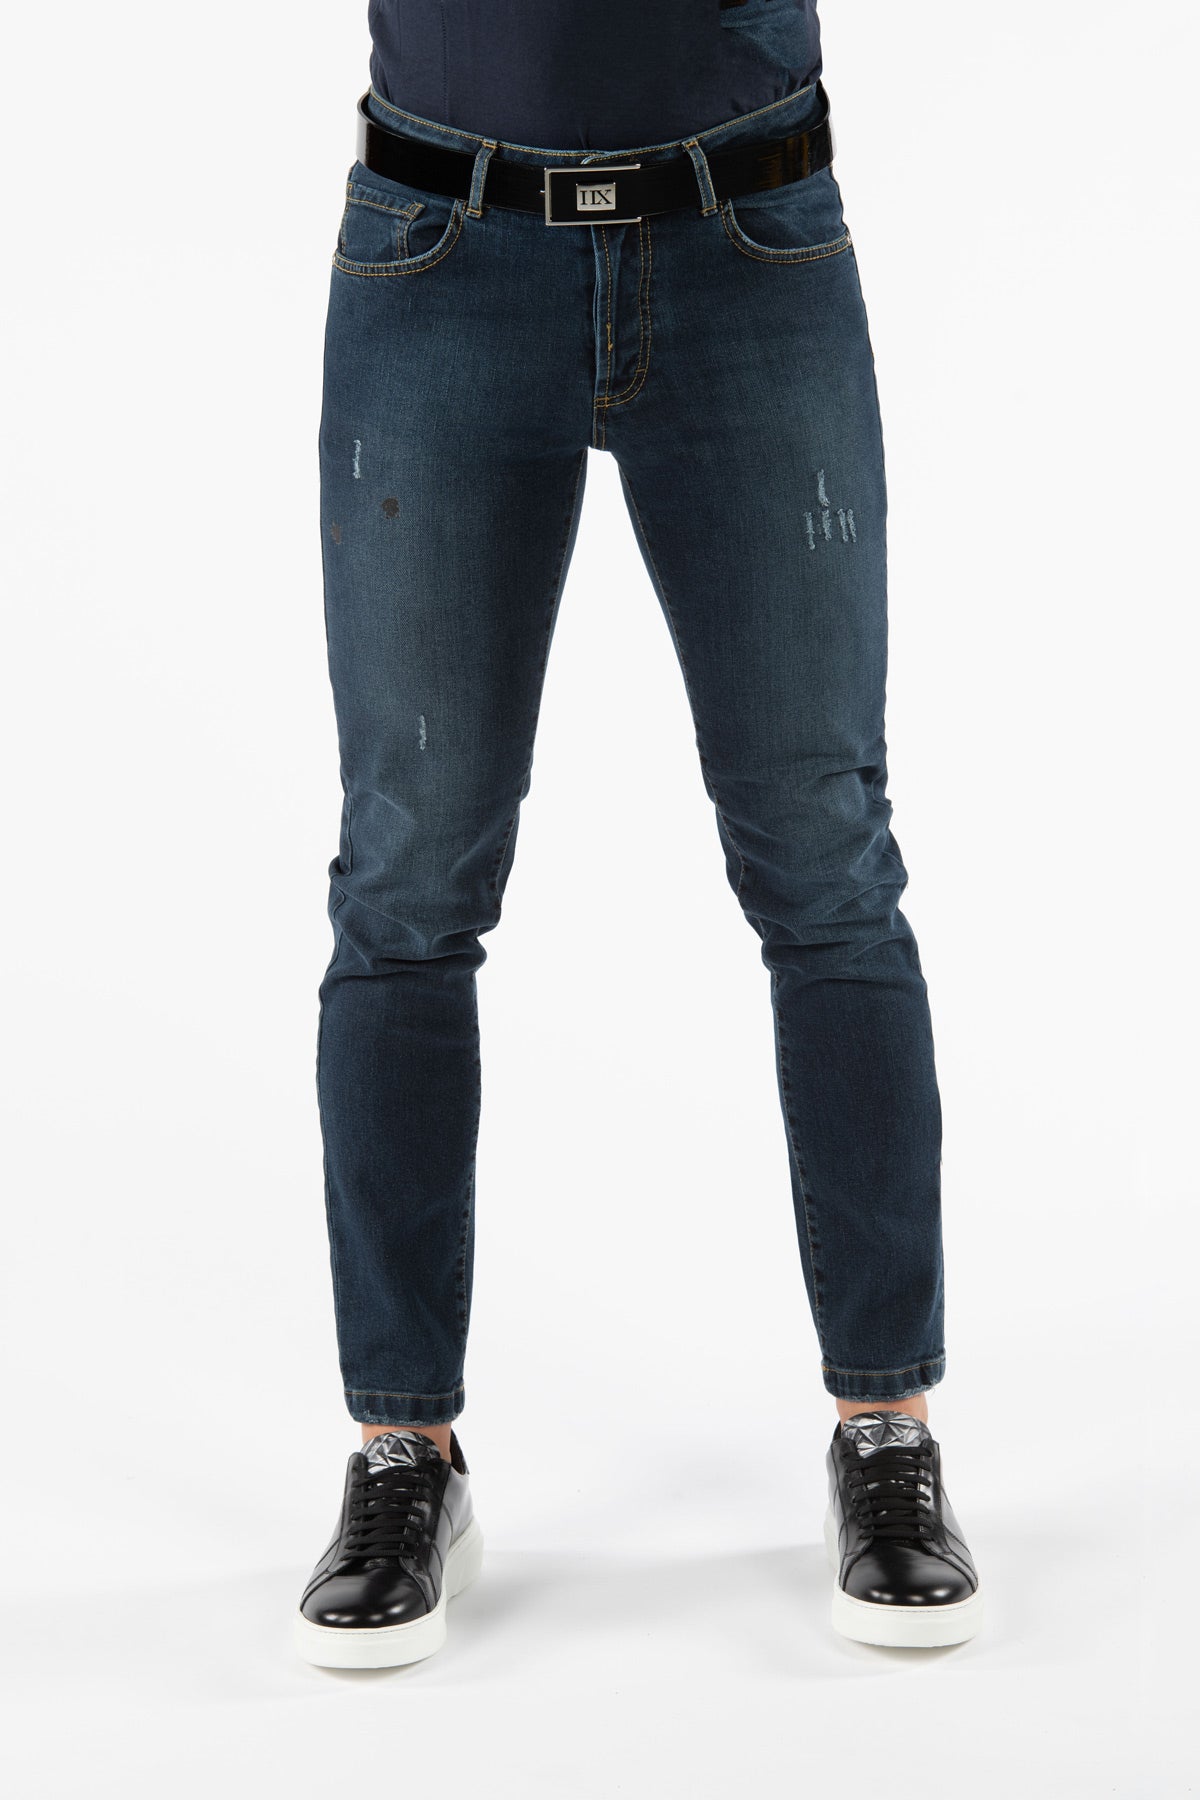 Jeans stretch HEXIS con logo 2.0